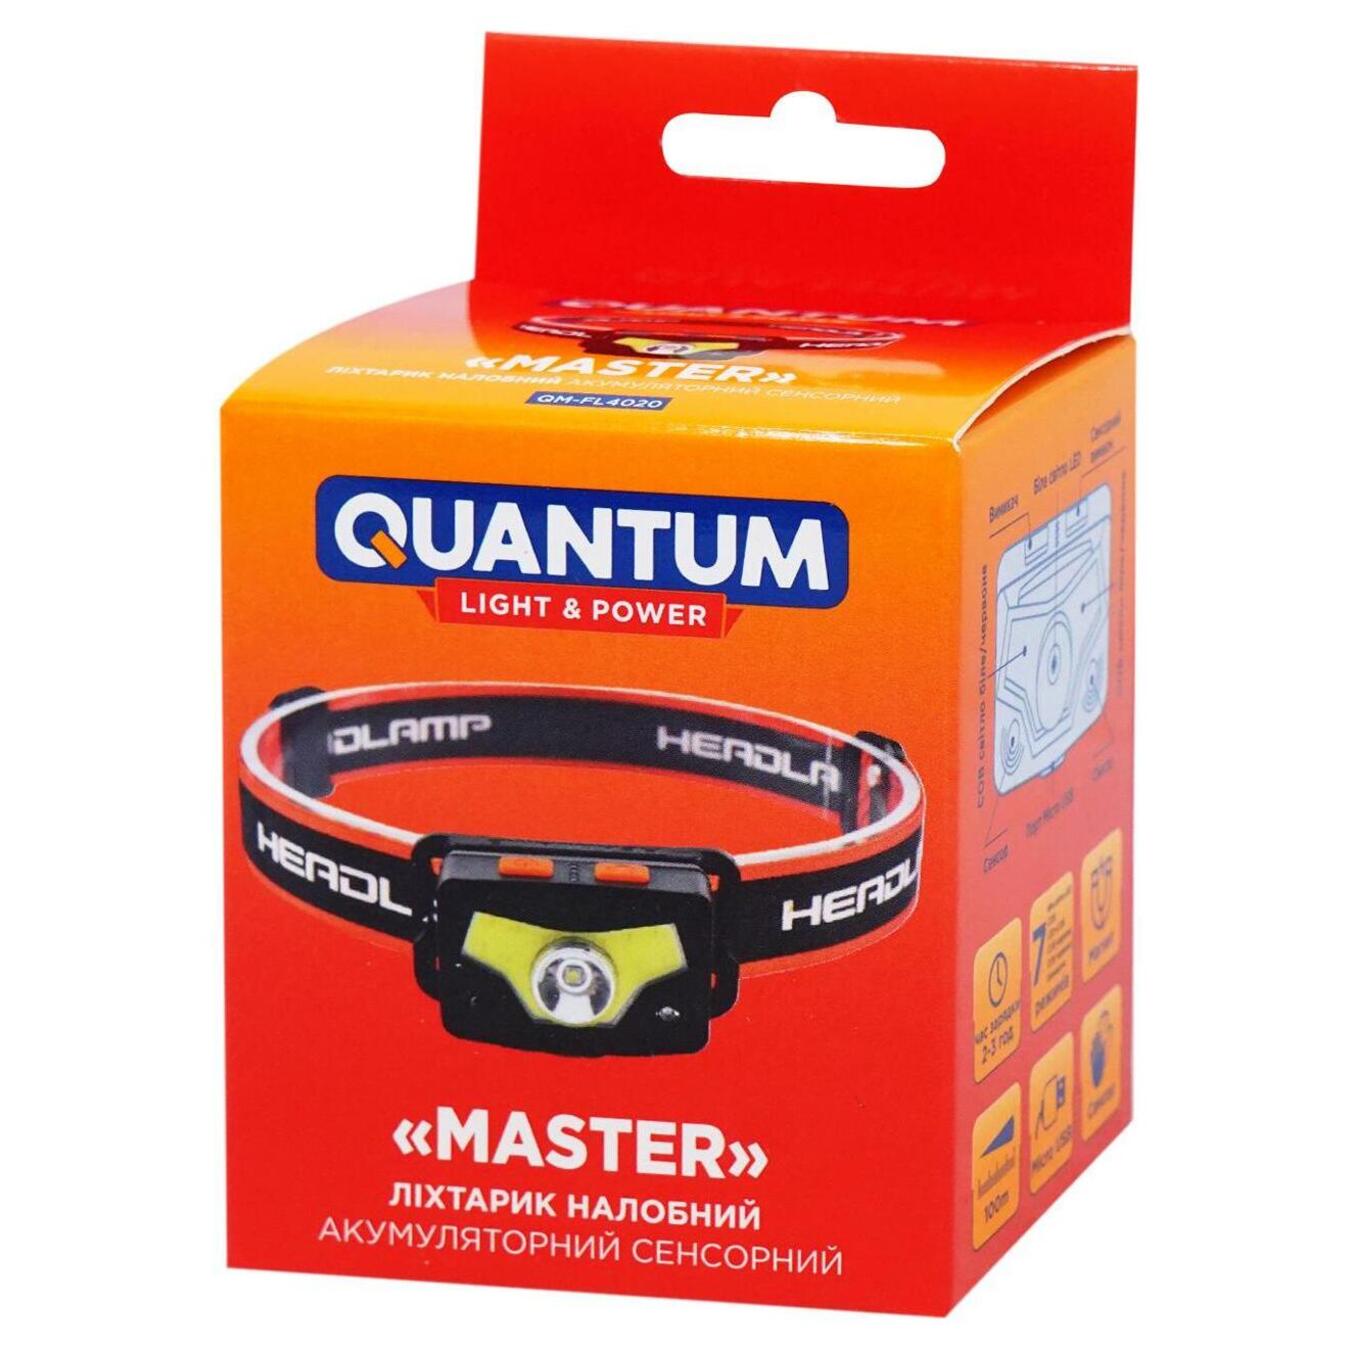 Headlamp Quantum Master rechargeable 5W 300Lm 100m